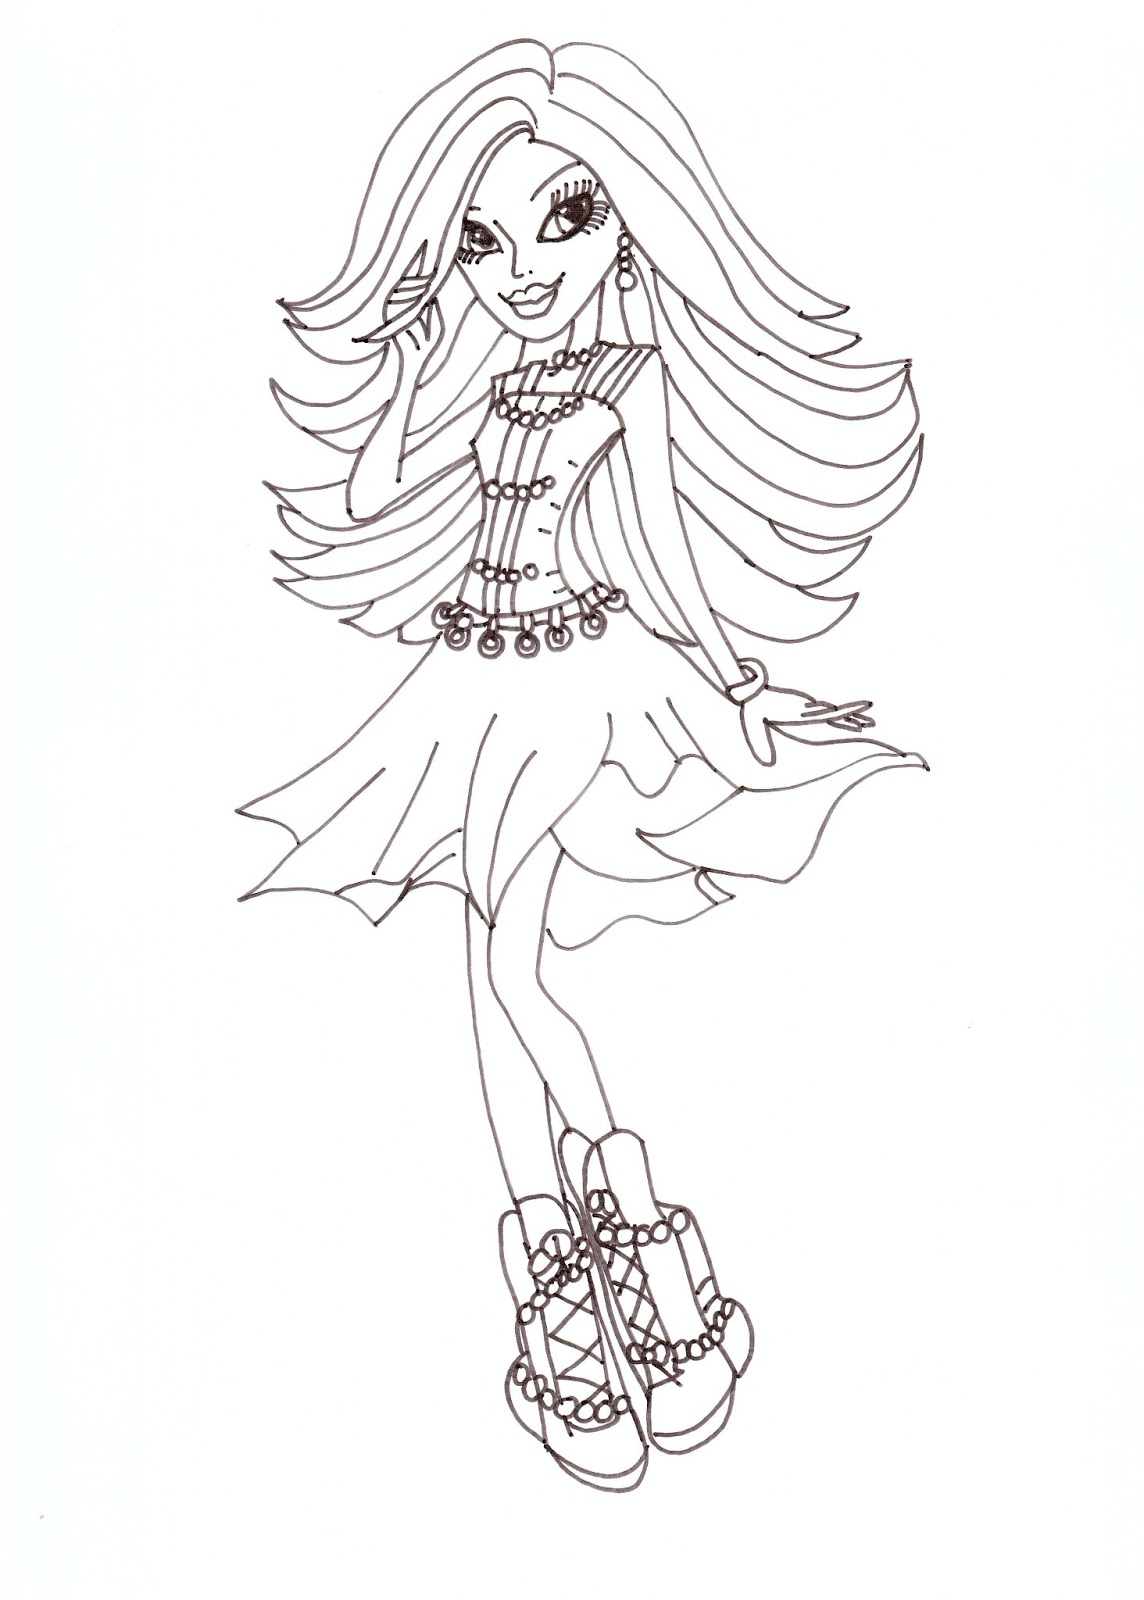 Free Printable Monster High Coloring Pages: Spectra Coloring Sheet